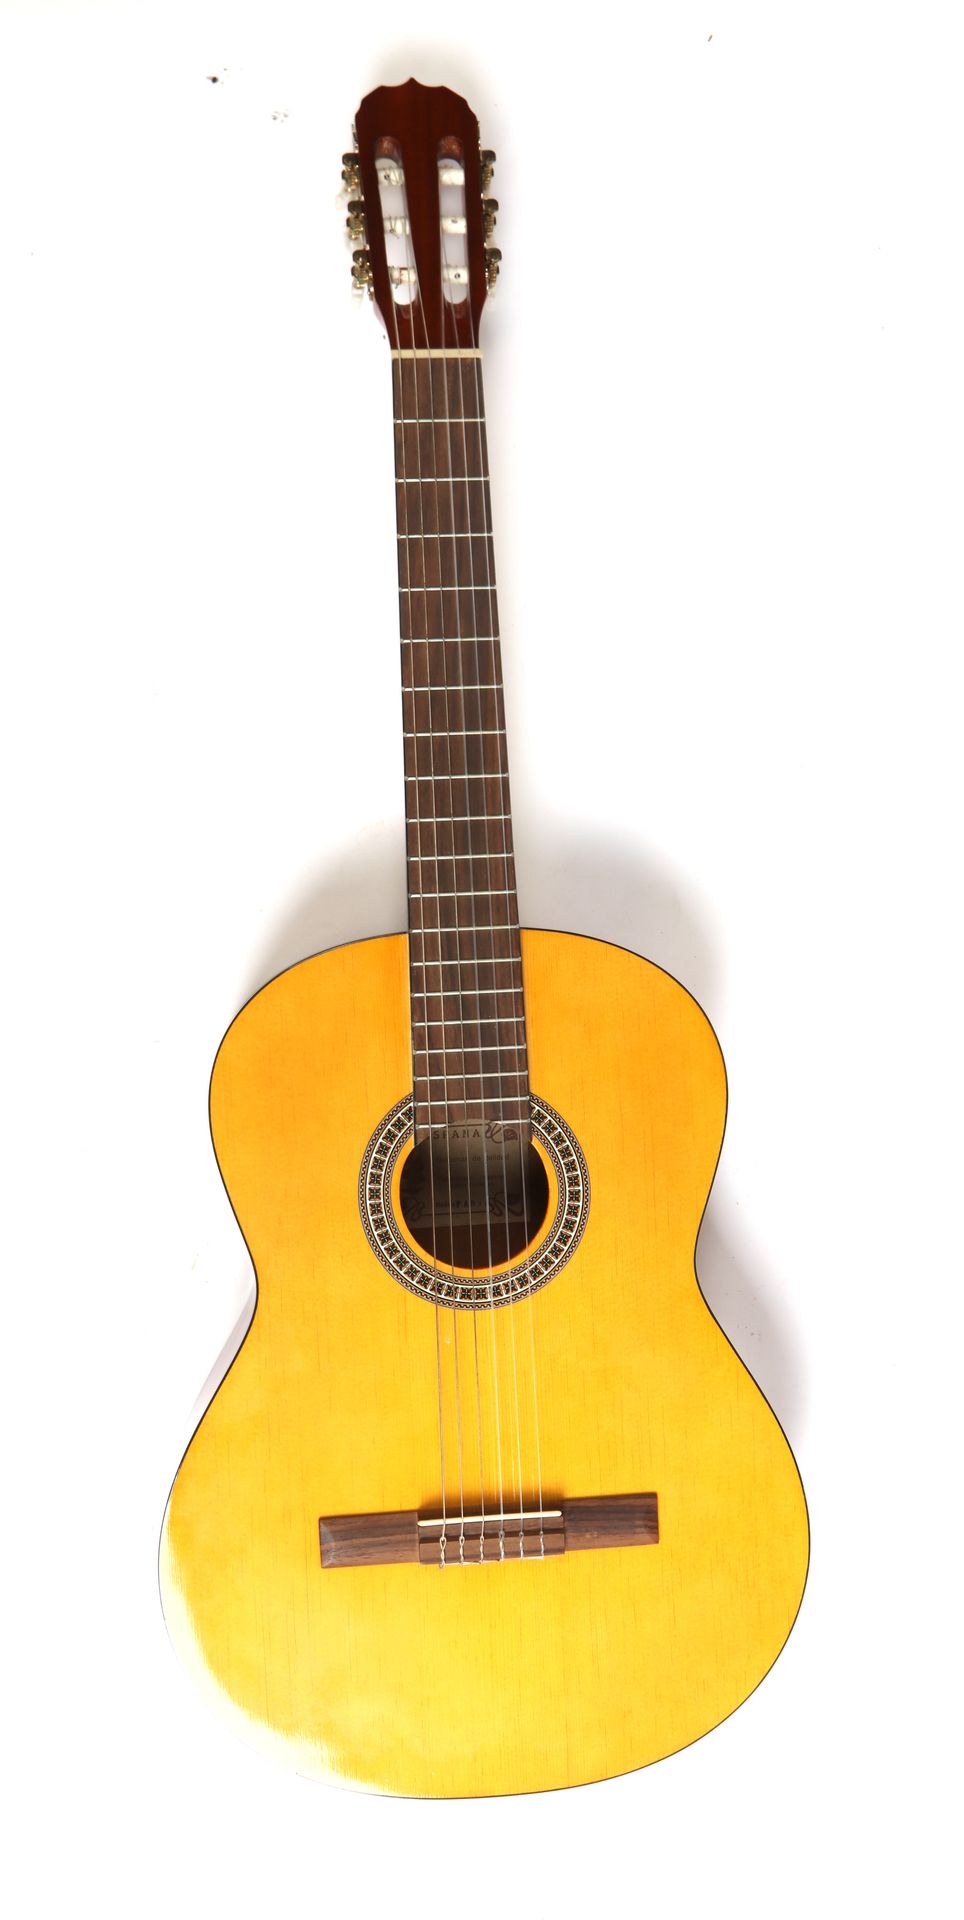 Null Classical guitar and case.